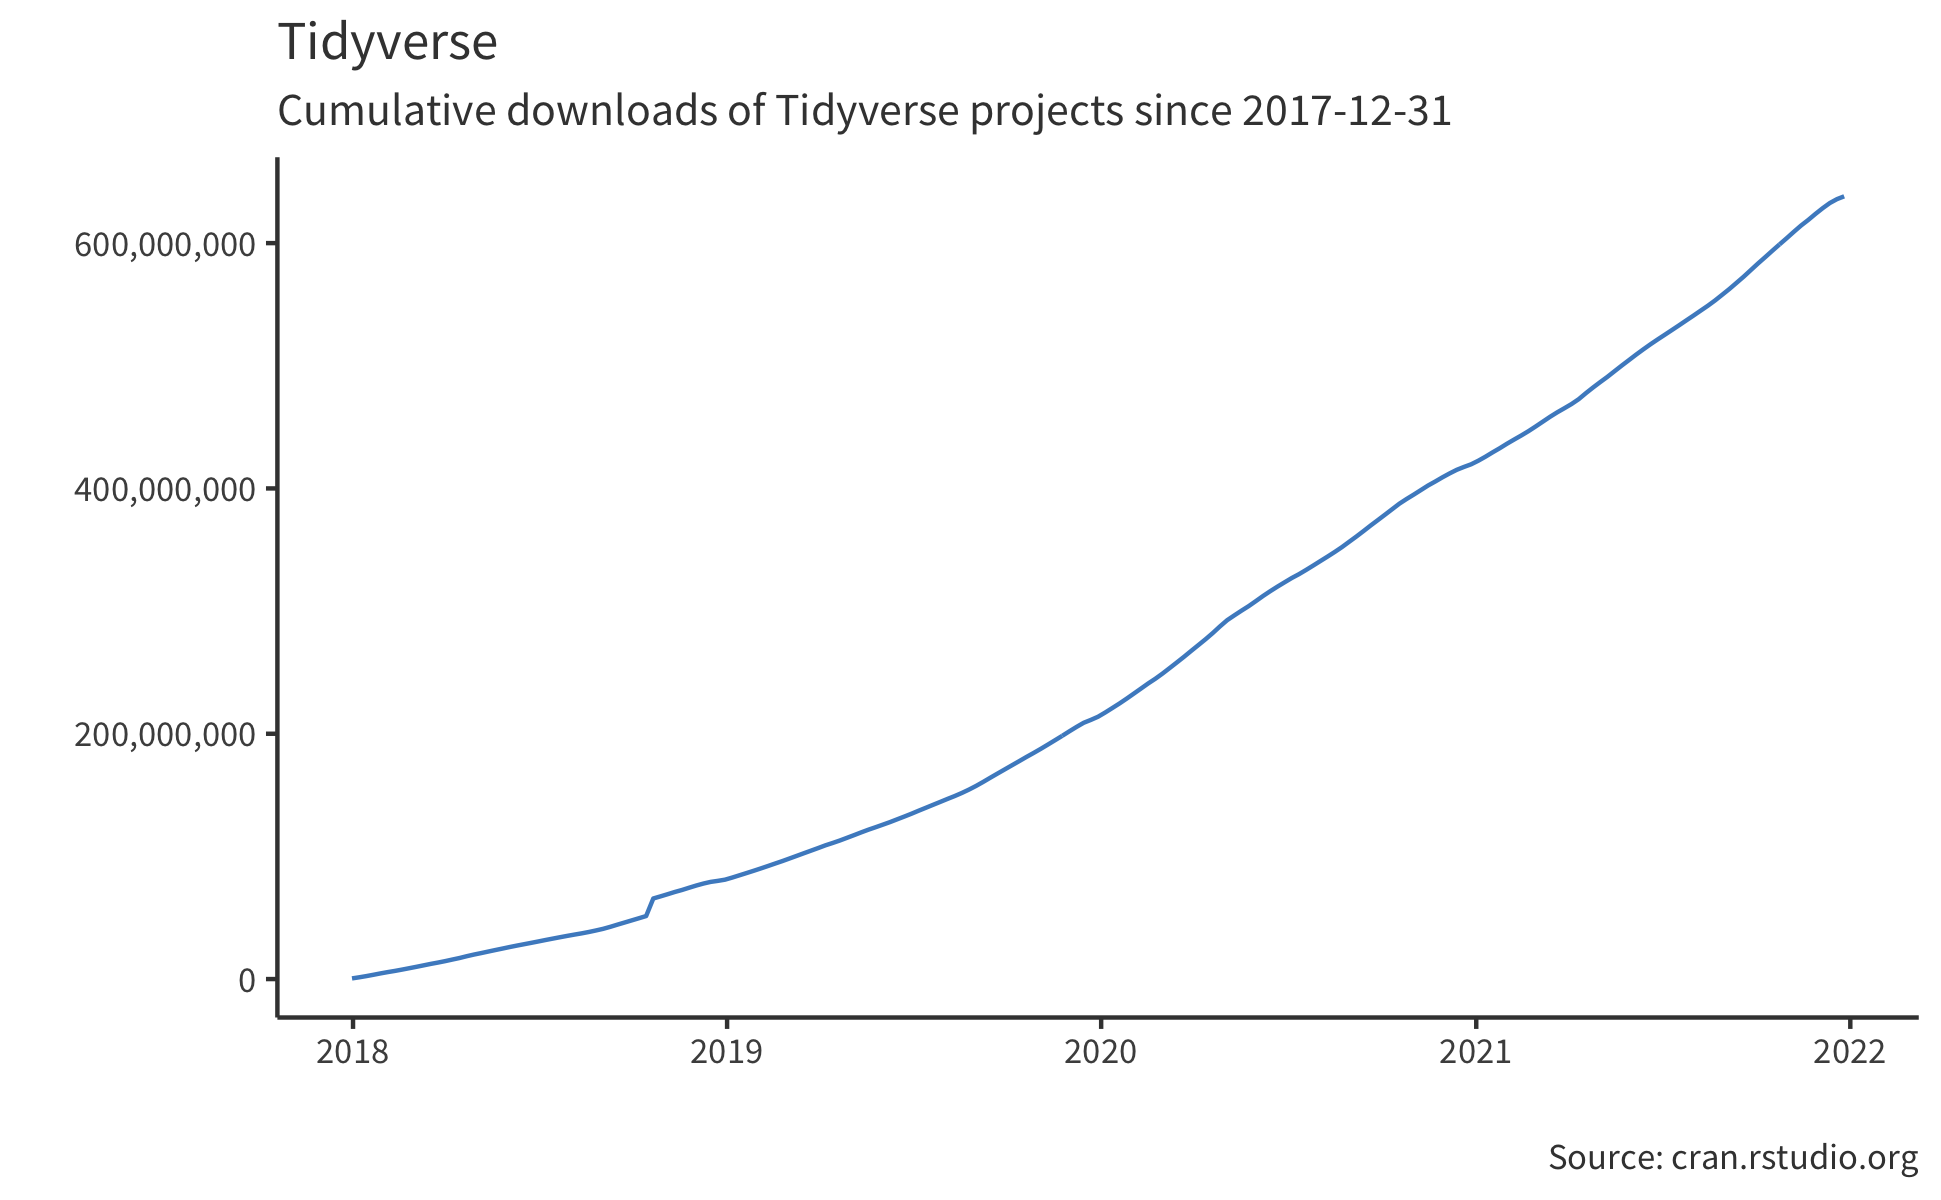 Text: Tidymodels Cumulative downloads of Tidyverse projects since 2017-12-31. Line graph starting at 0 in 2018 and increasing to over 600 million in 2022.